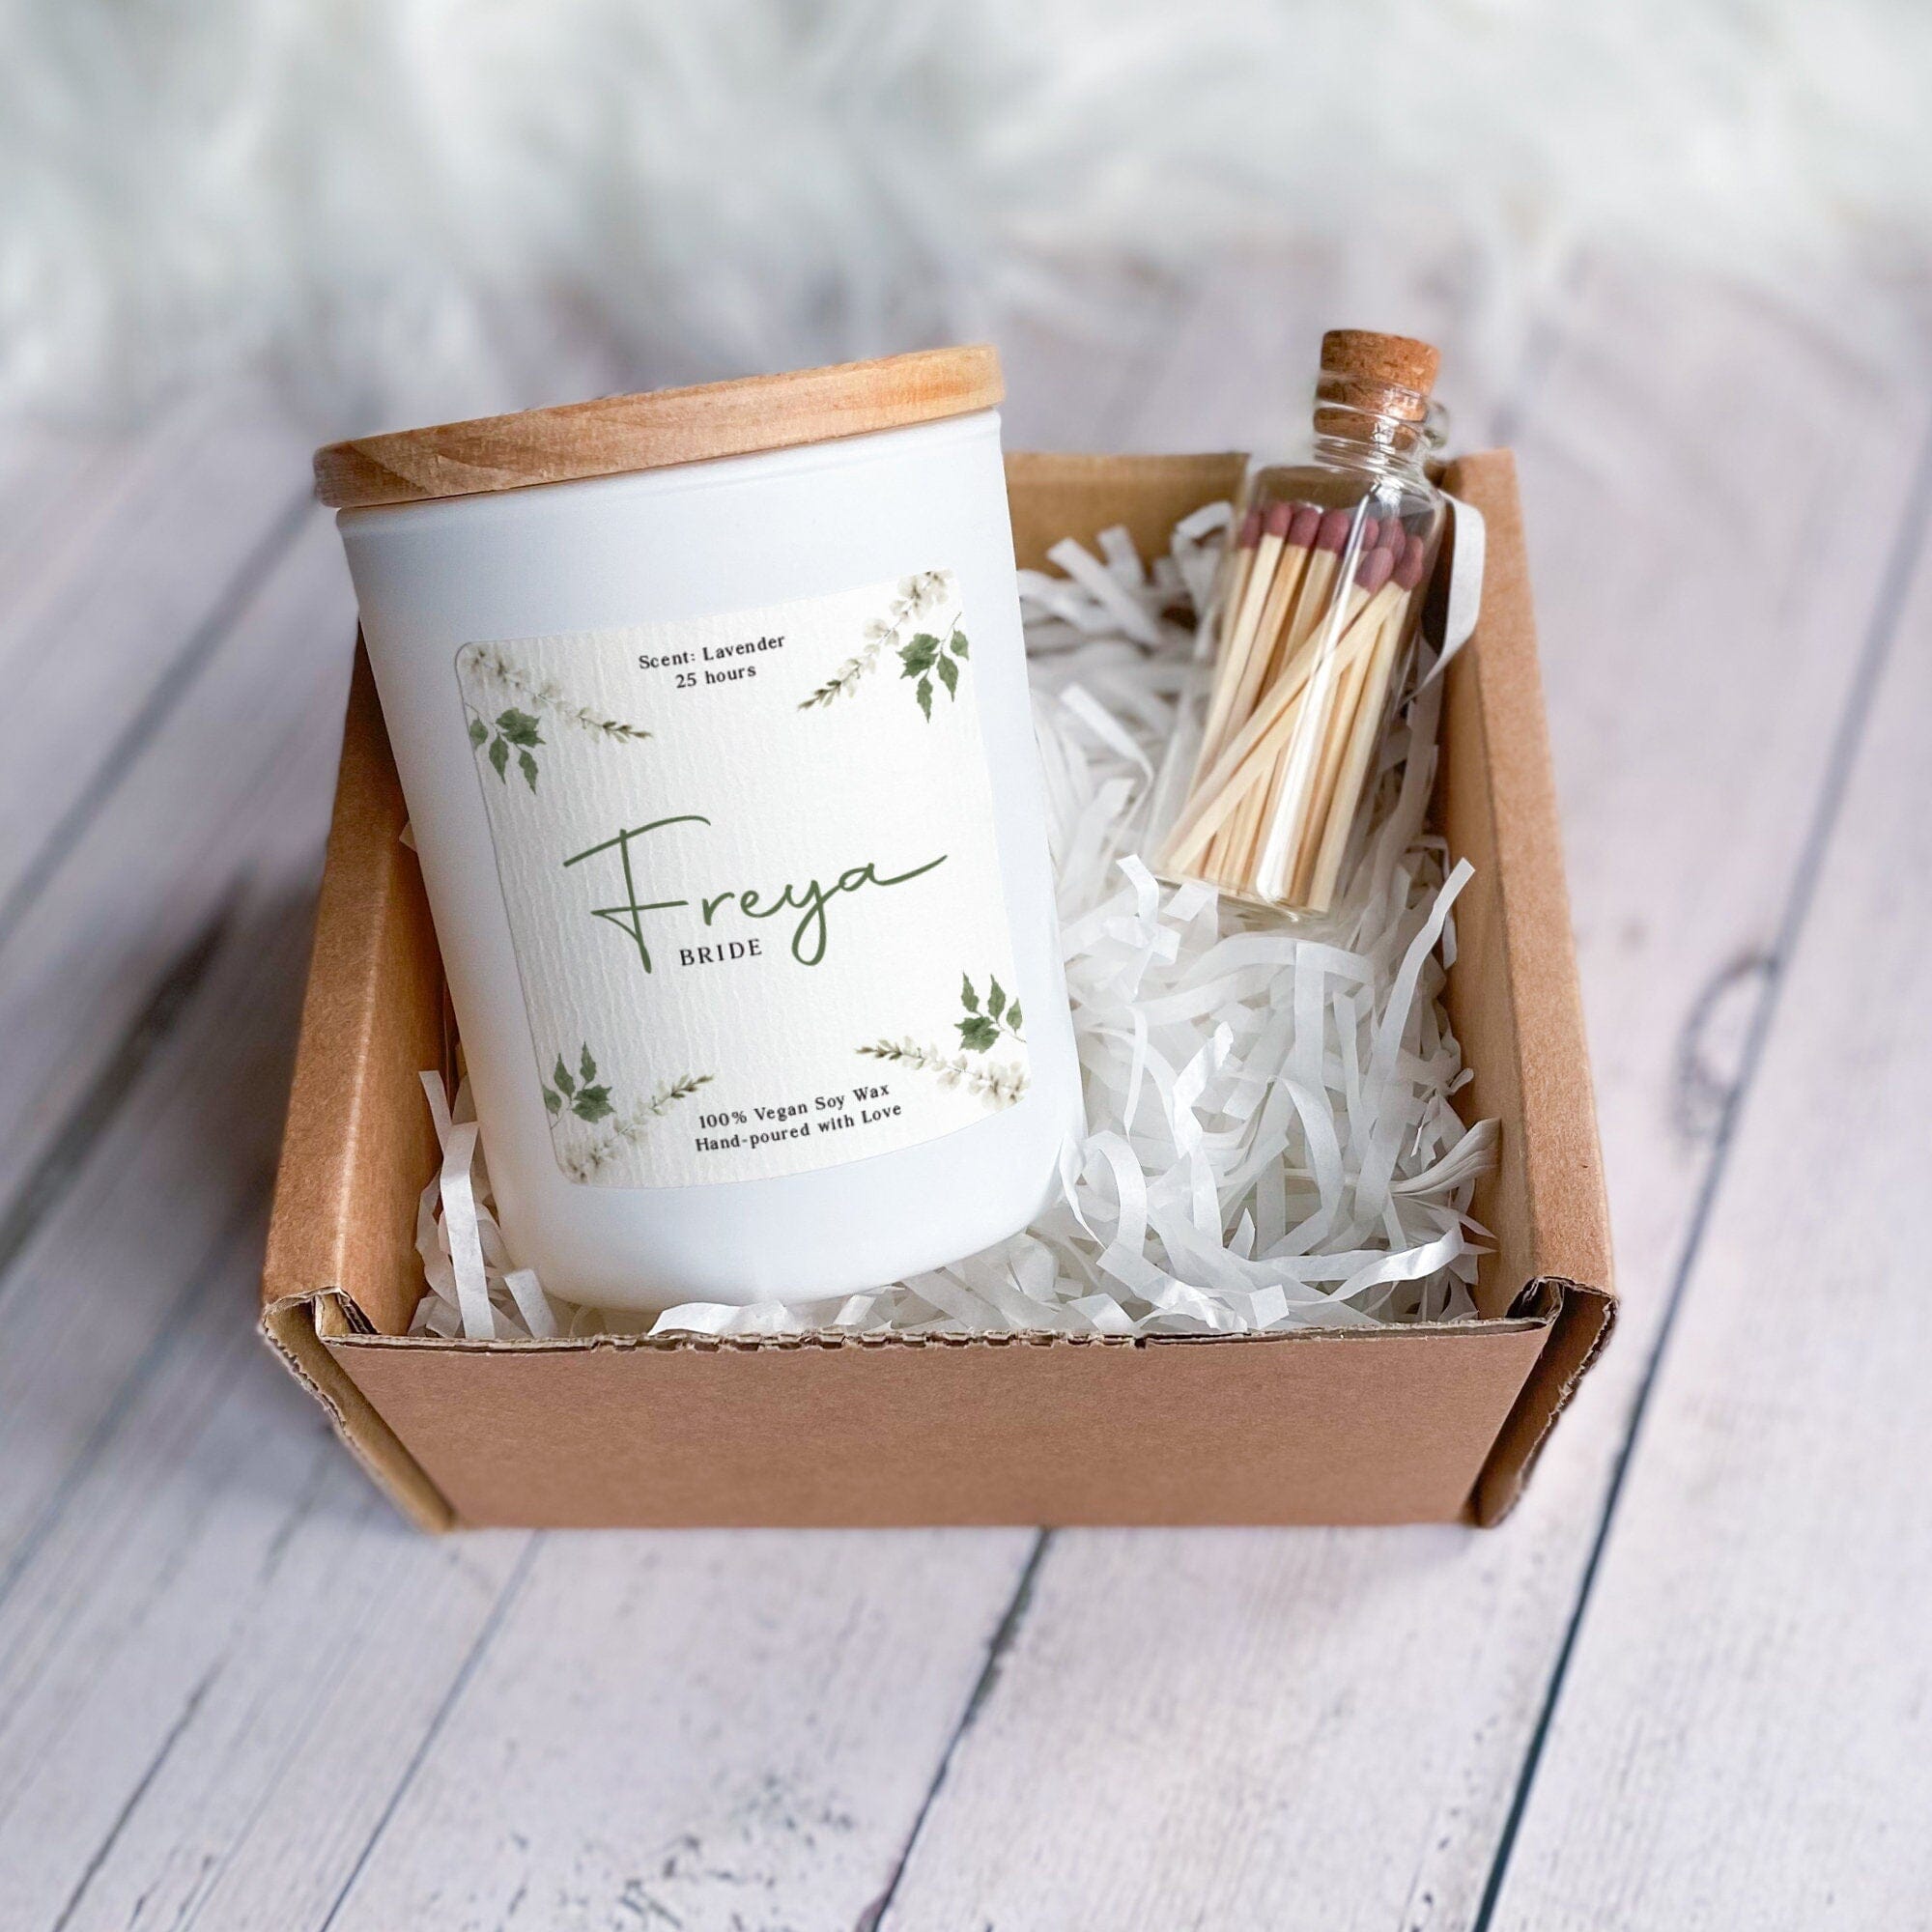 Wedding Role Candle With Name Gift For Bride Bridesmaid Maid Of Honour Mother Of The Bride